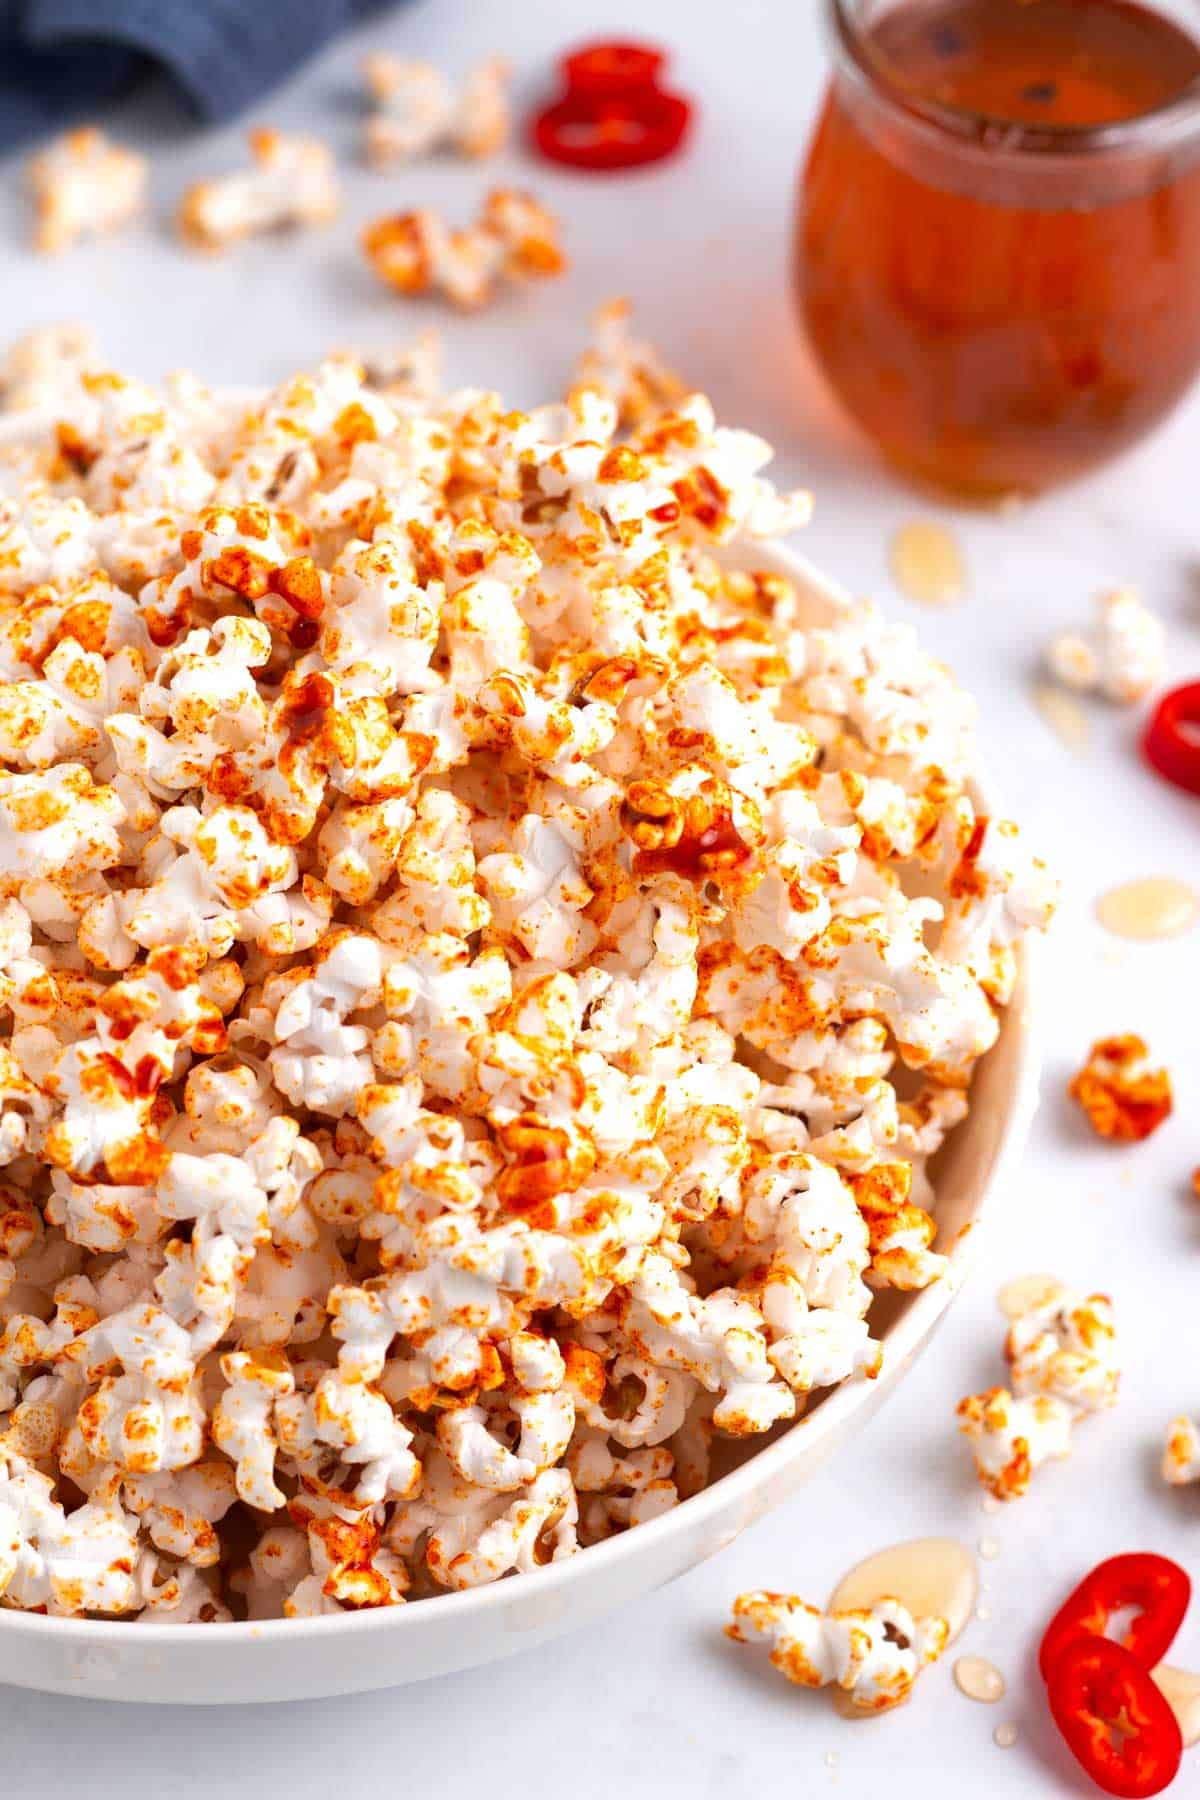 Spicy hot honey popcorn in a serving bowl with red fresno chili slices and honey drips on counter top.